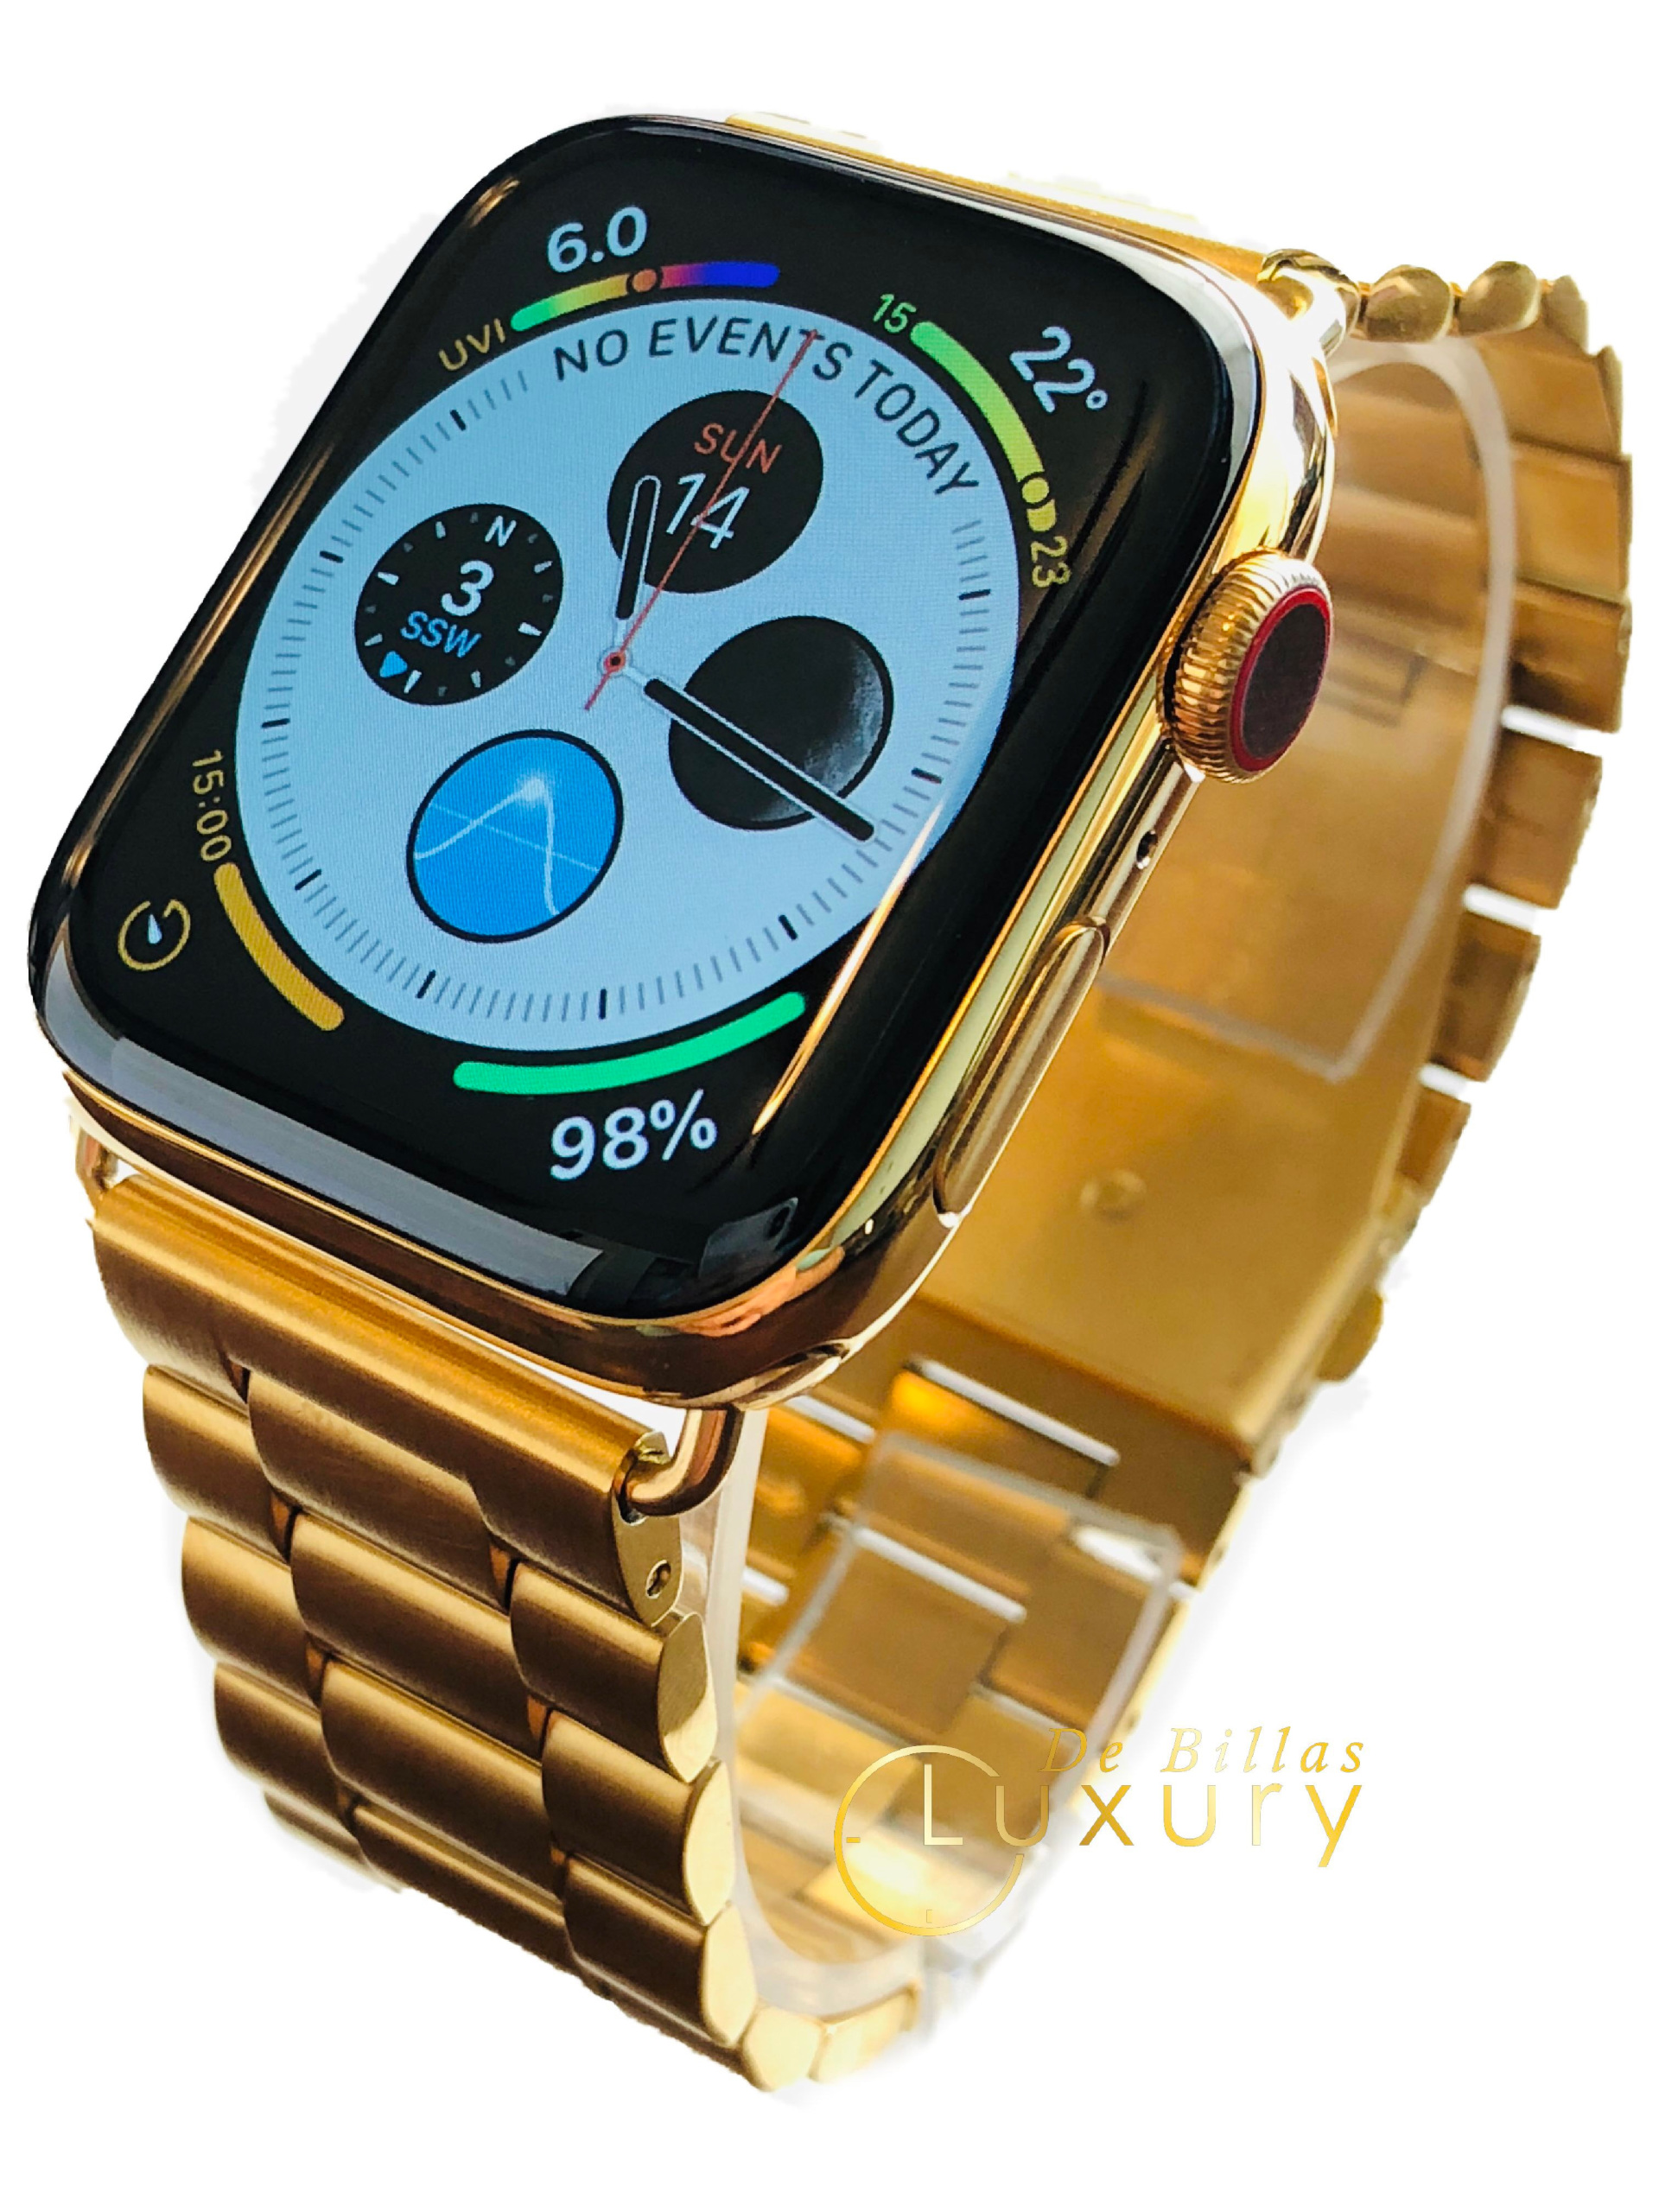 24K Gold 44MM Apple Watch SERIES 4 with Gold Links Band